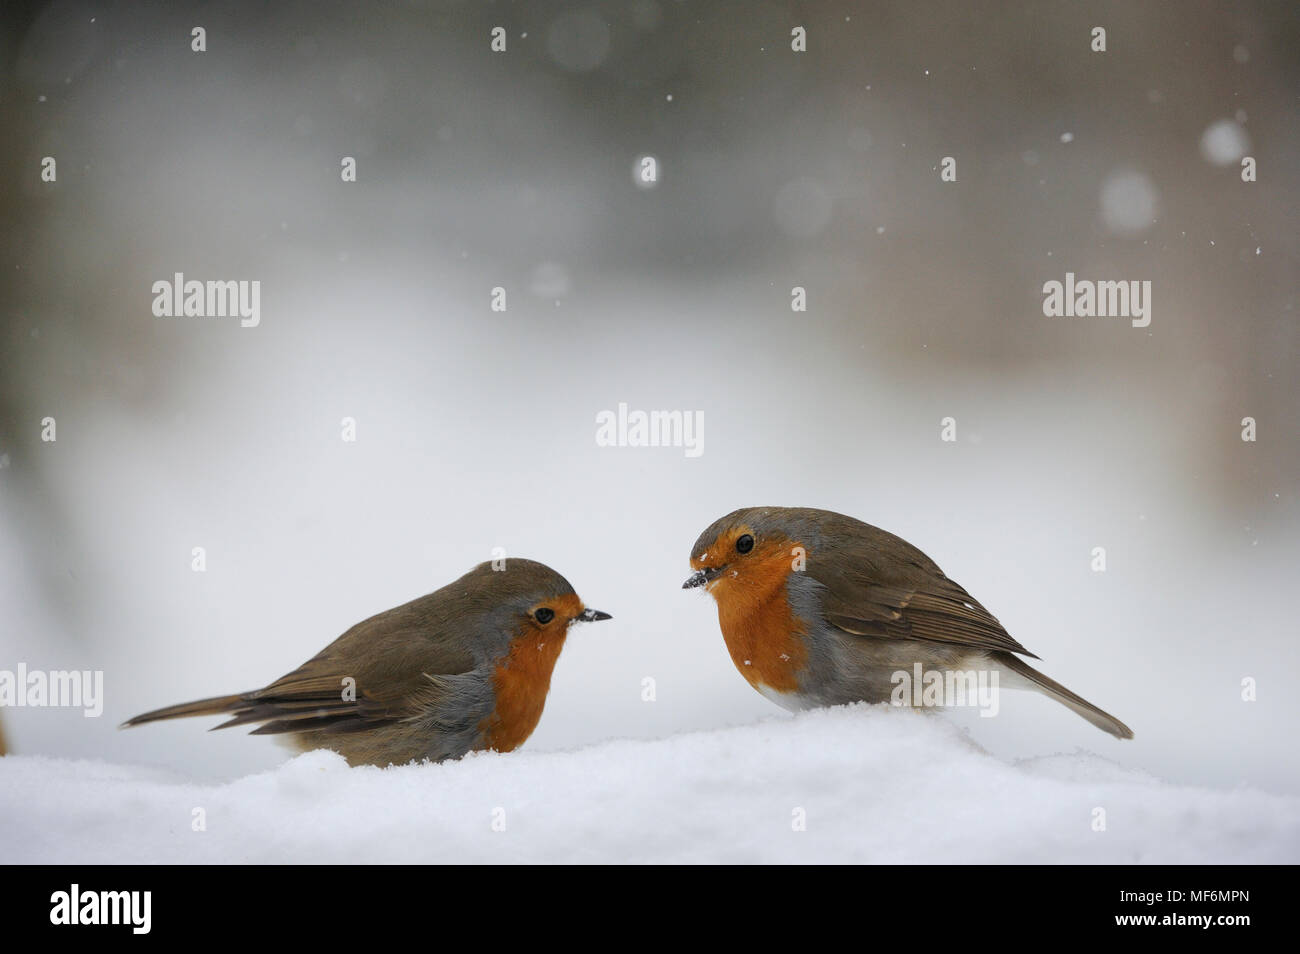 Robins in falling snow Stock Photo